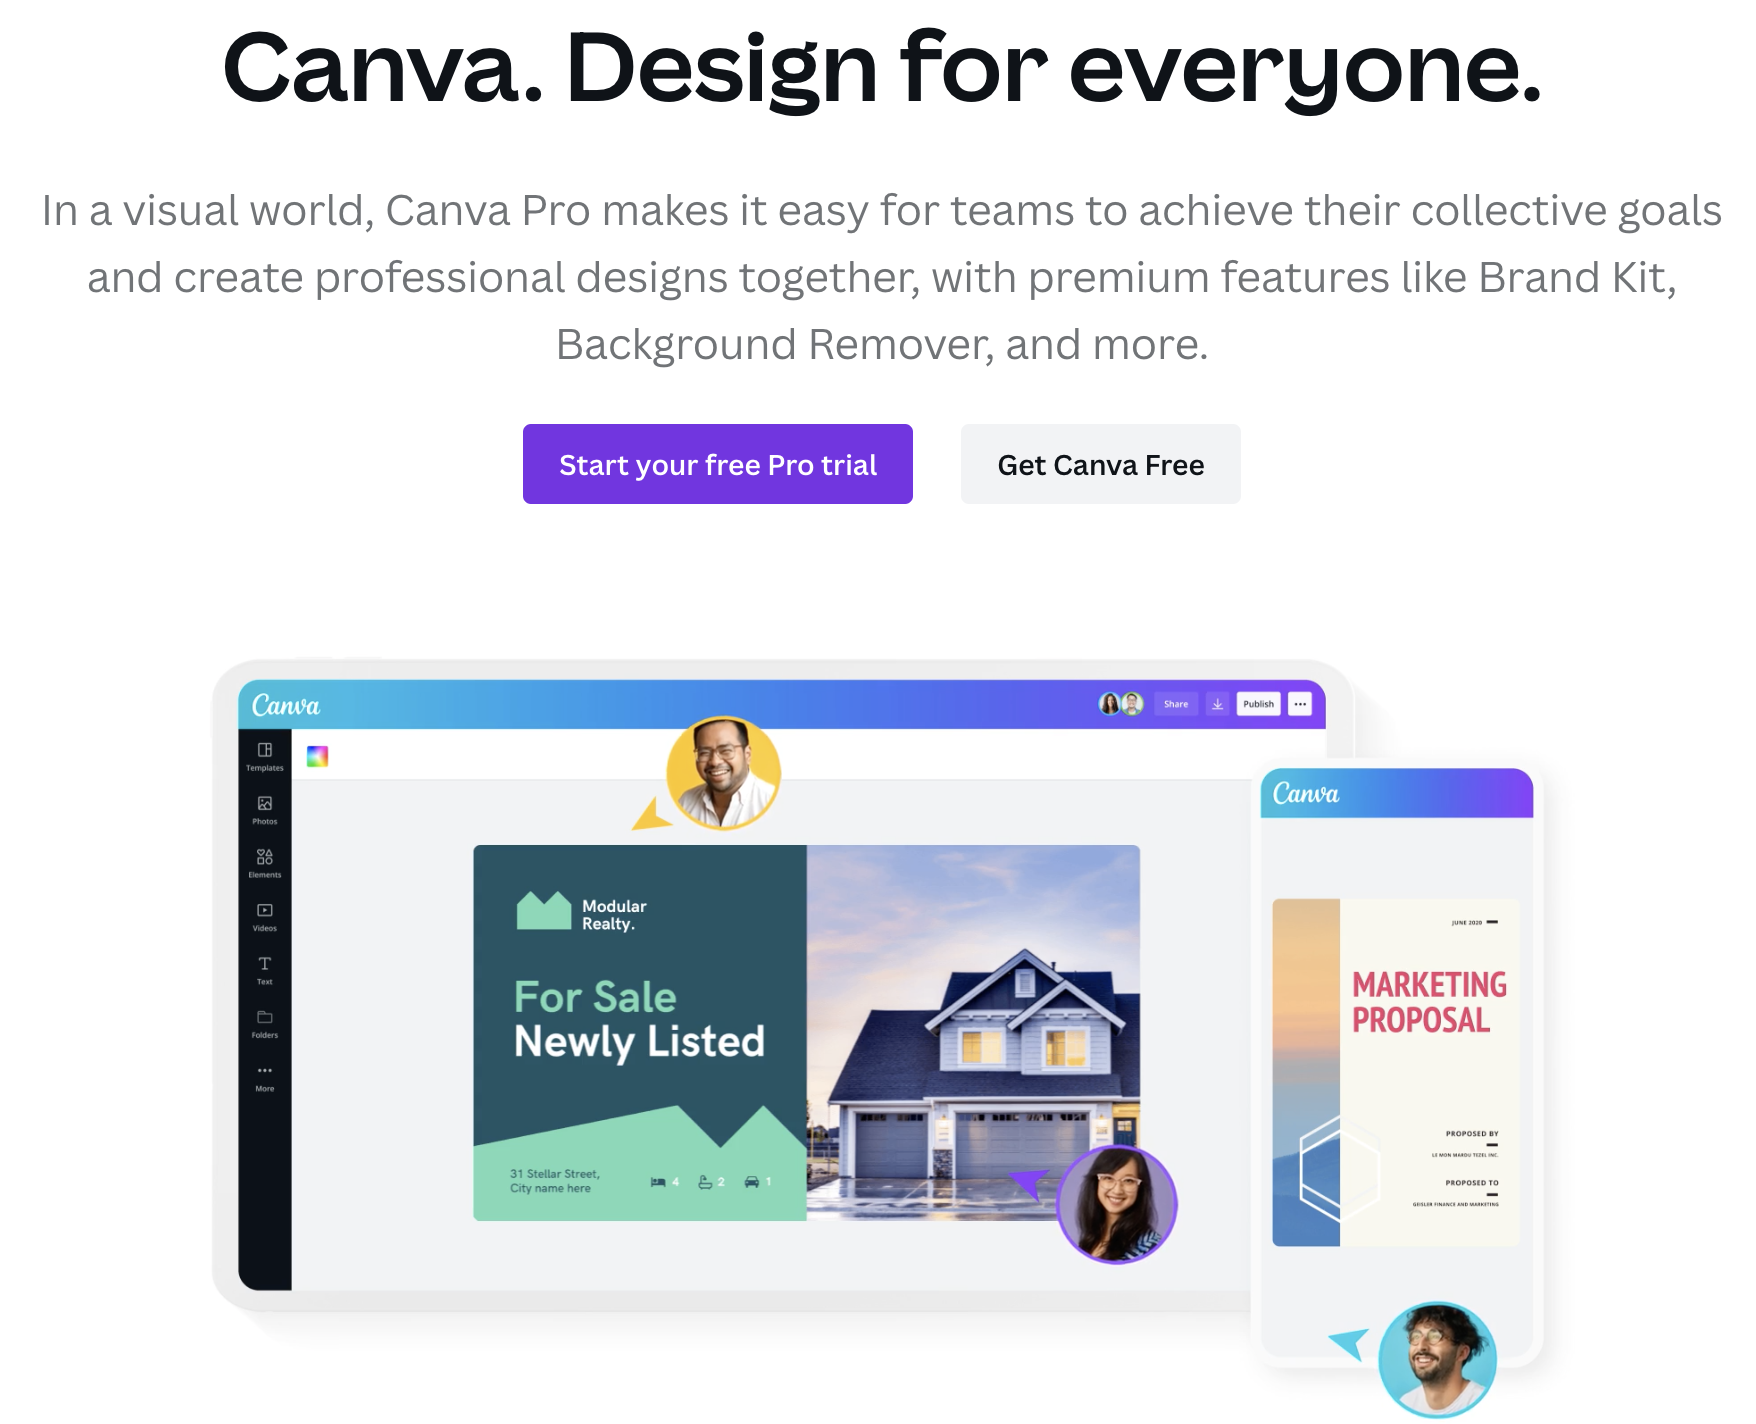 Image of the software CANVA